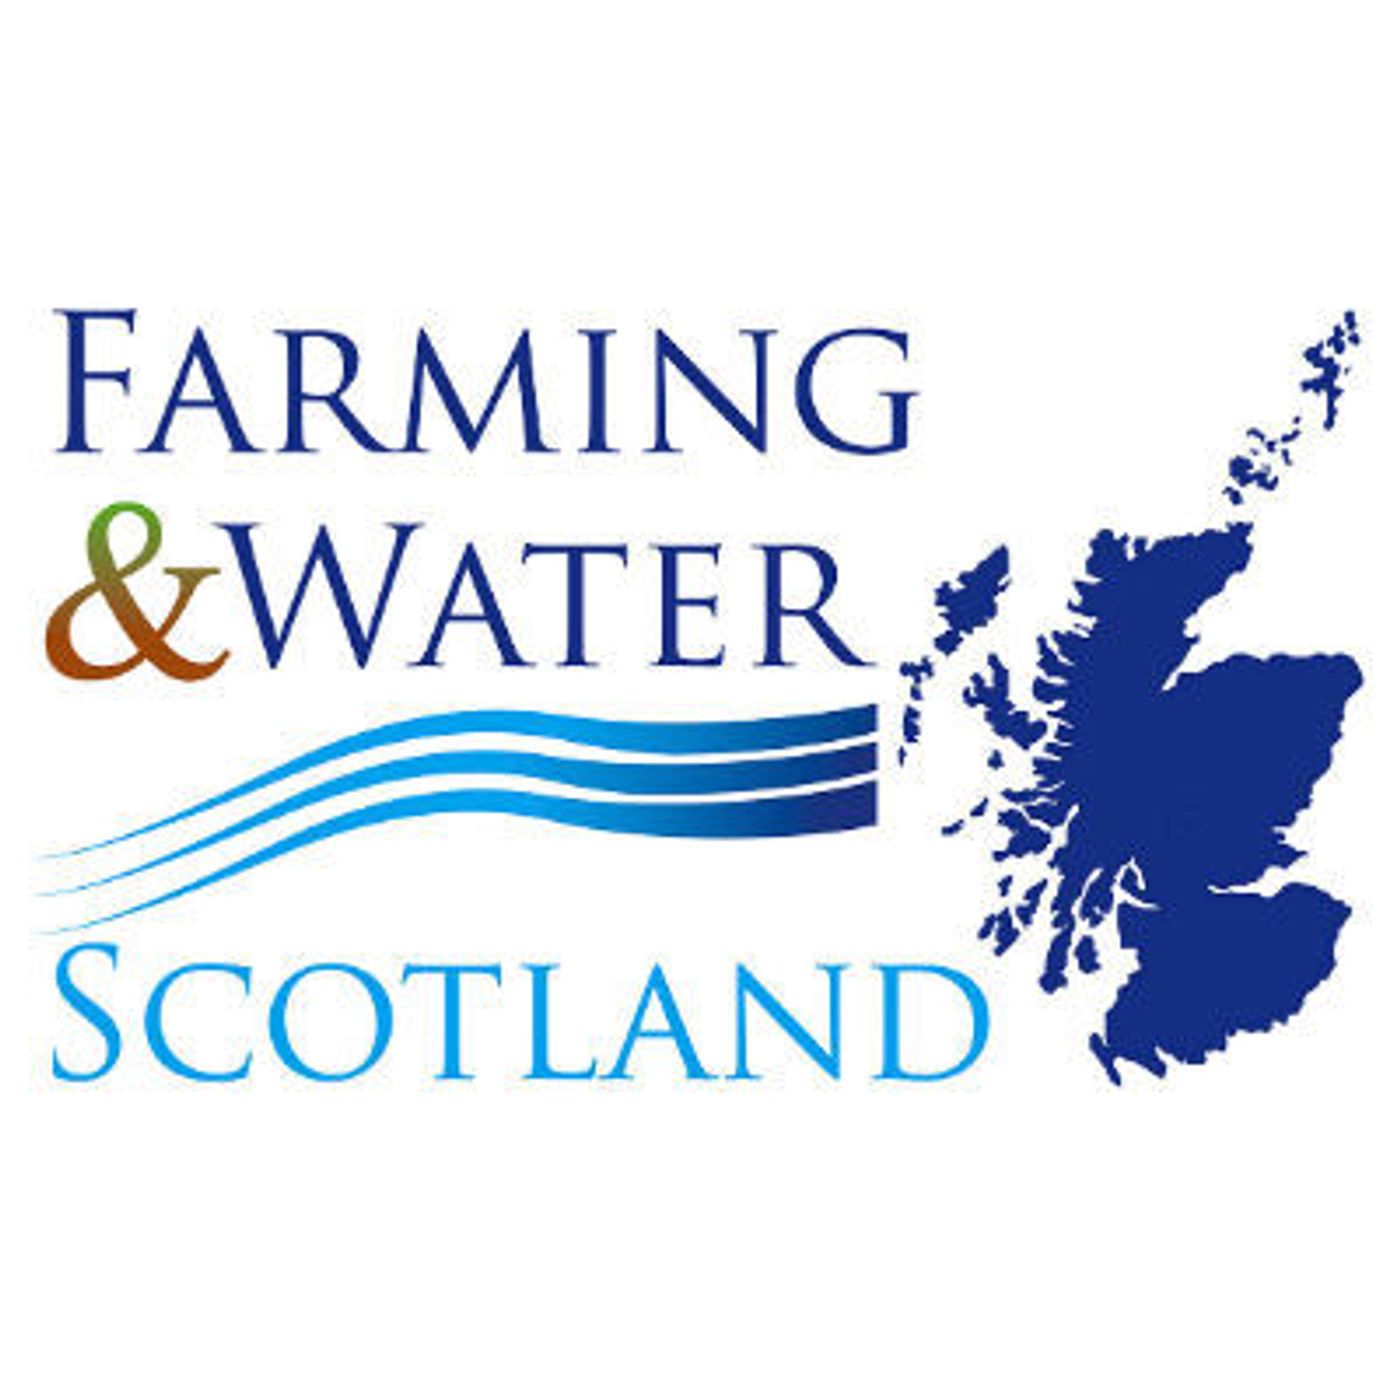 3: Who are Farming and Water Scotland?